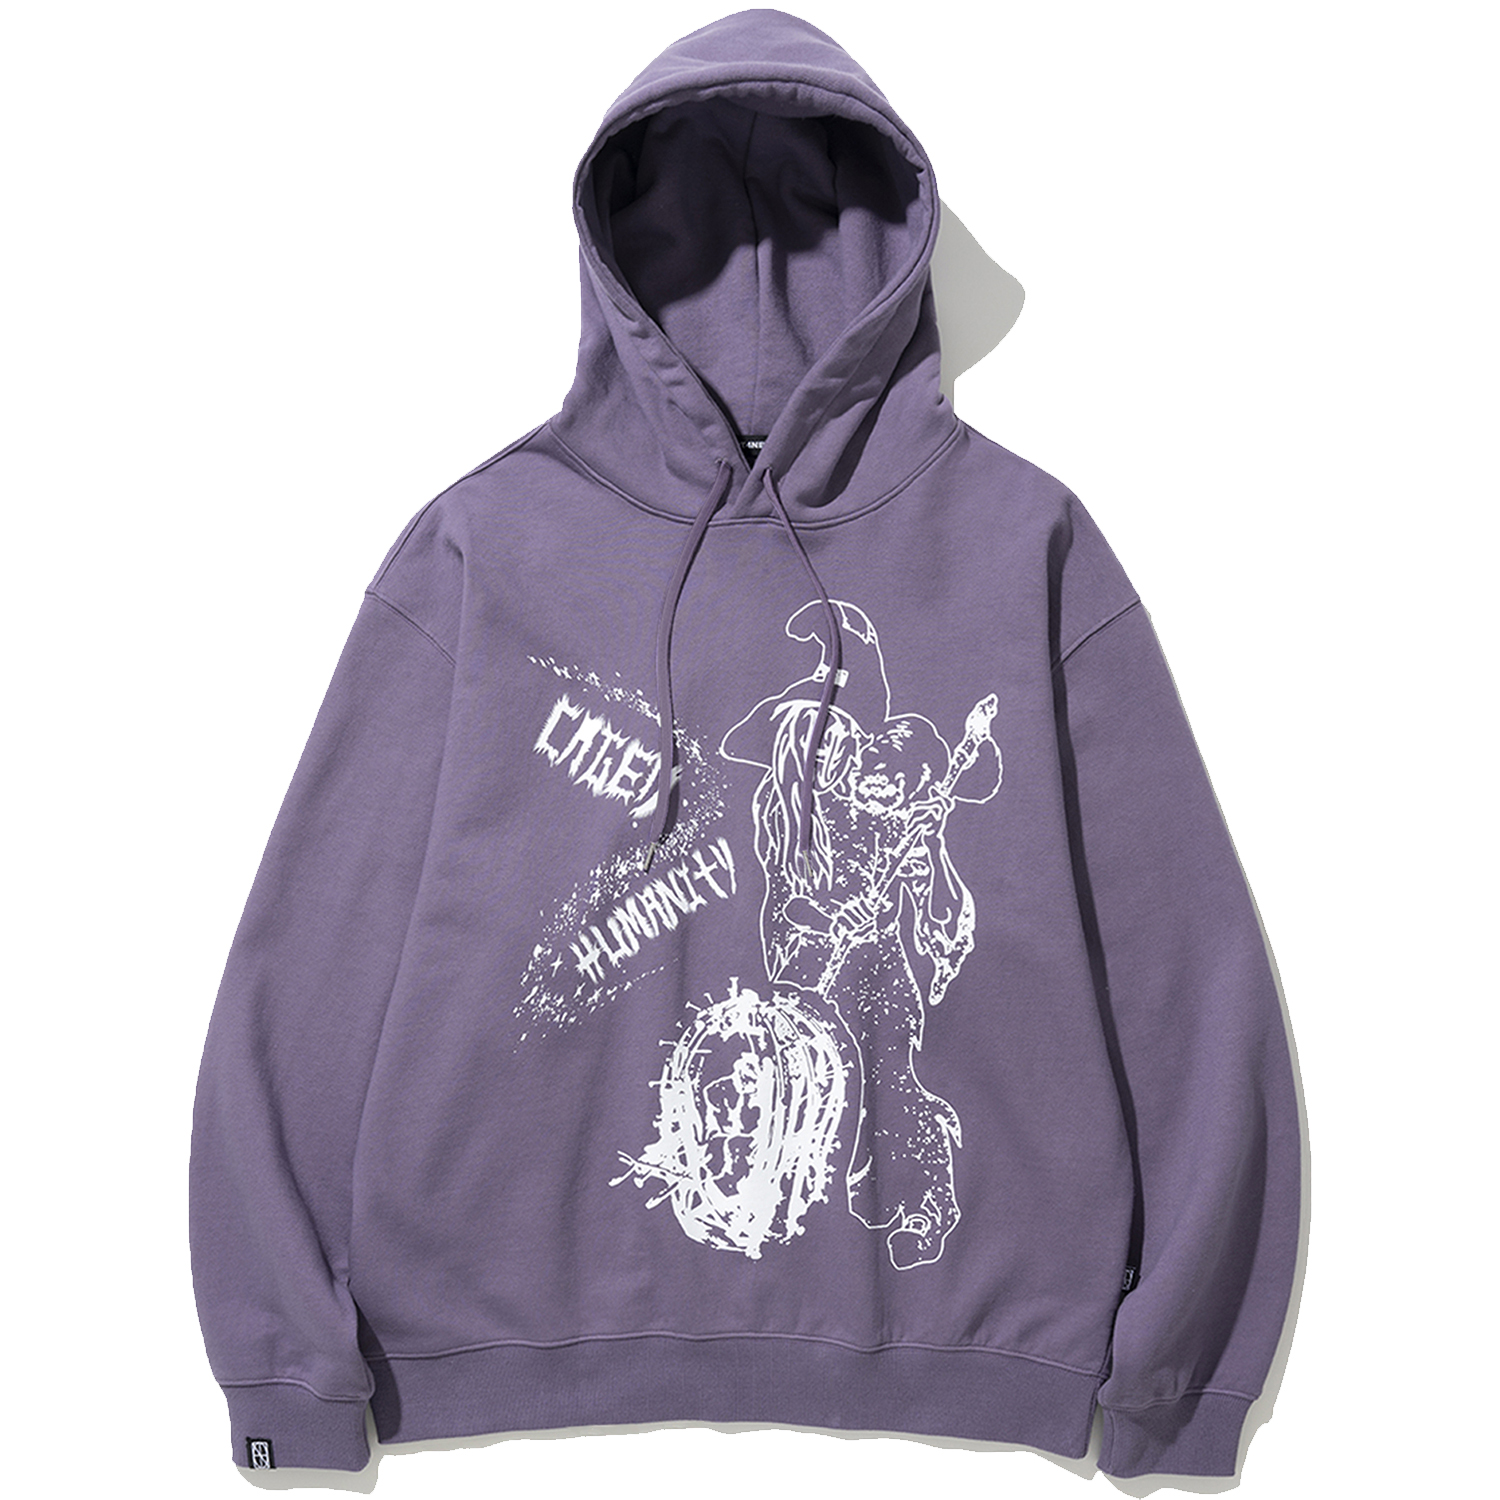 Caged Humanity Pullover Hood - Purple,NOT4NERD